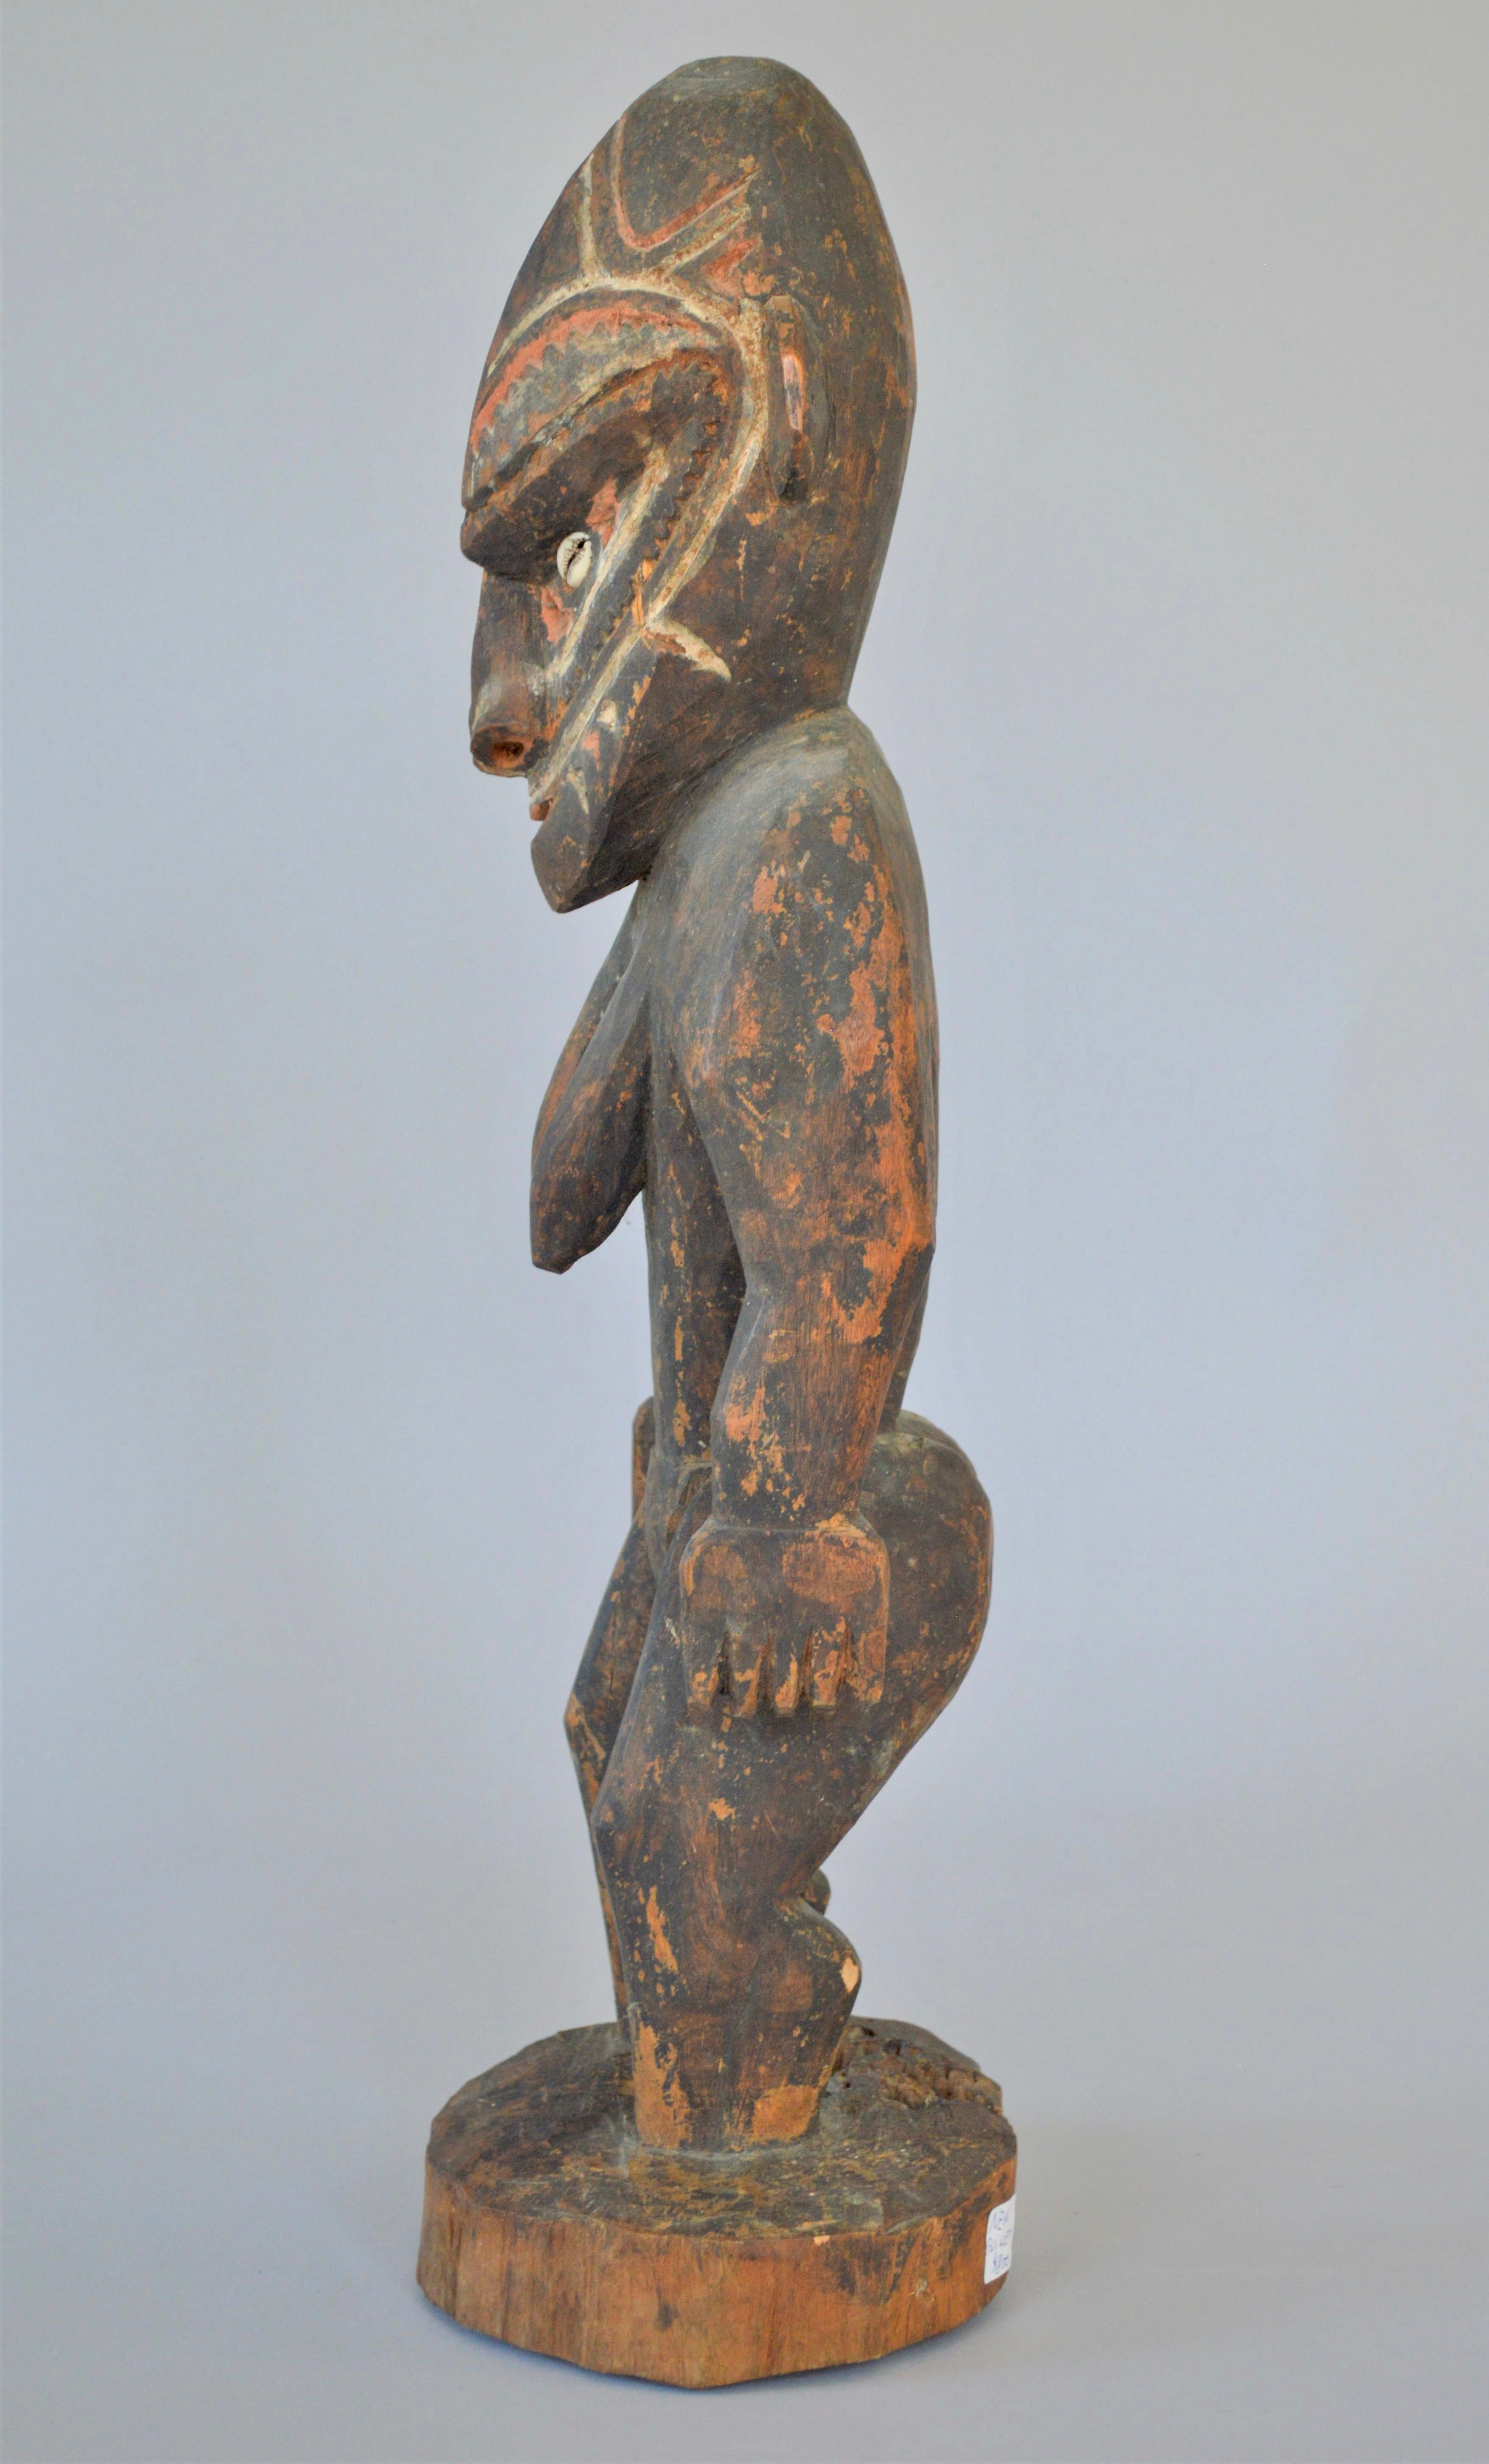 Malay worship female figure, carved in wood, standing with inlaid shell
Marked in buttom: 